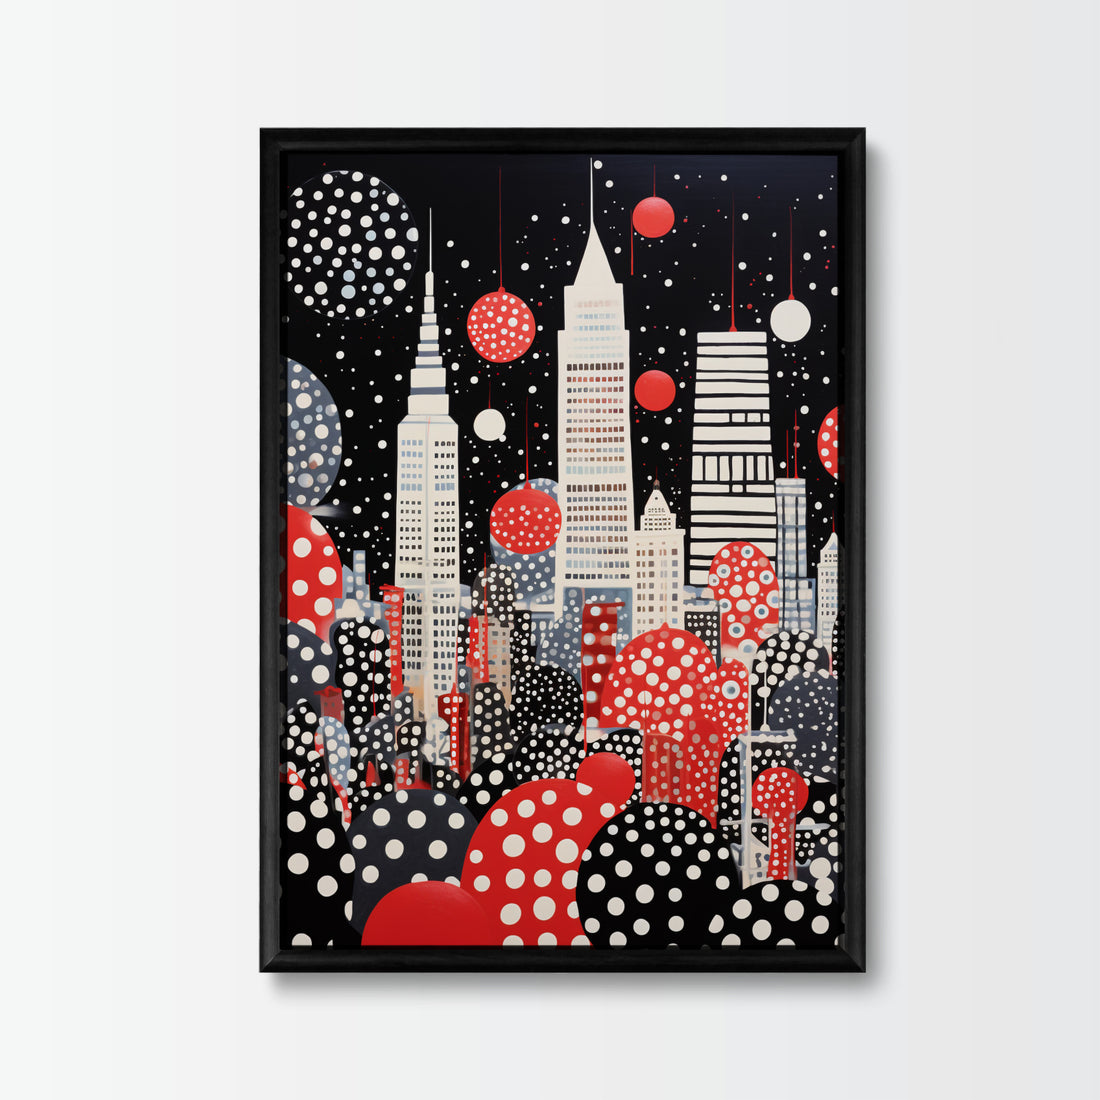 Poster Metropolitan Polkadot - Add sophistication to your home